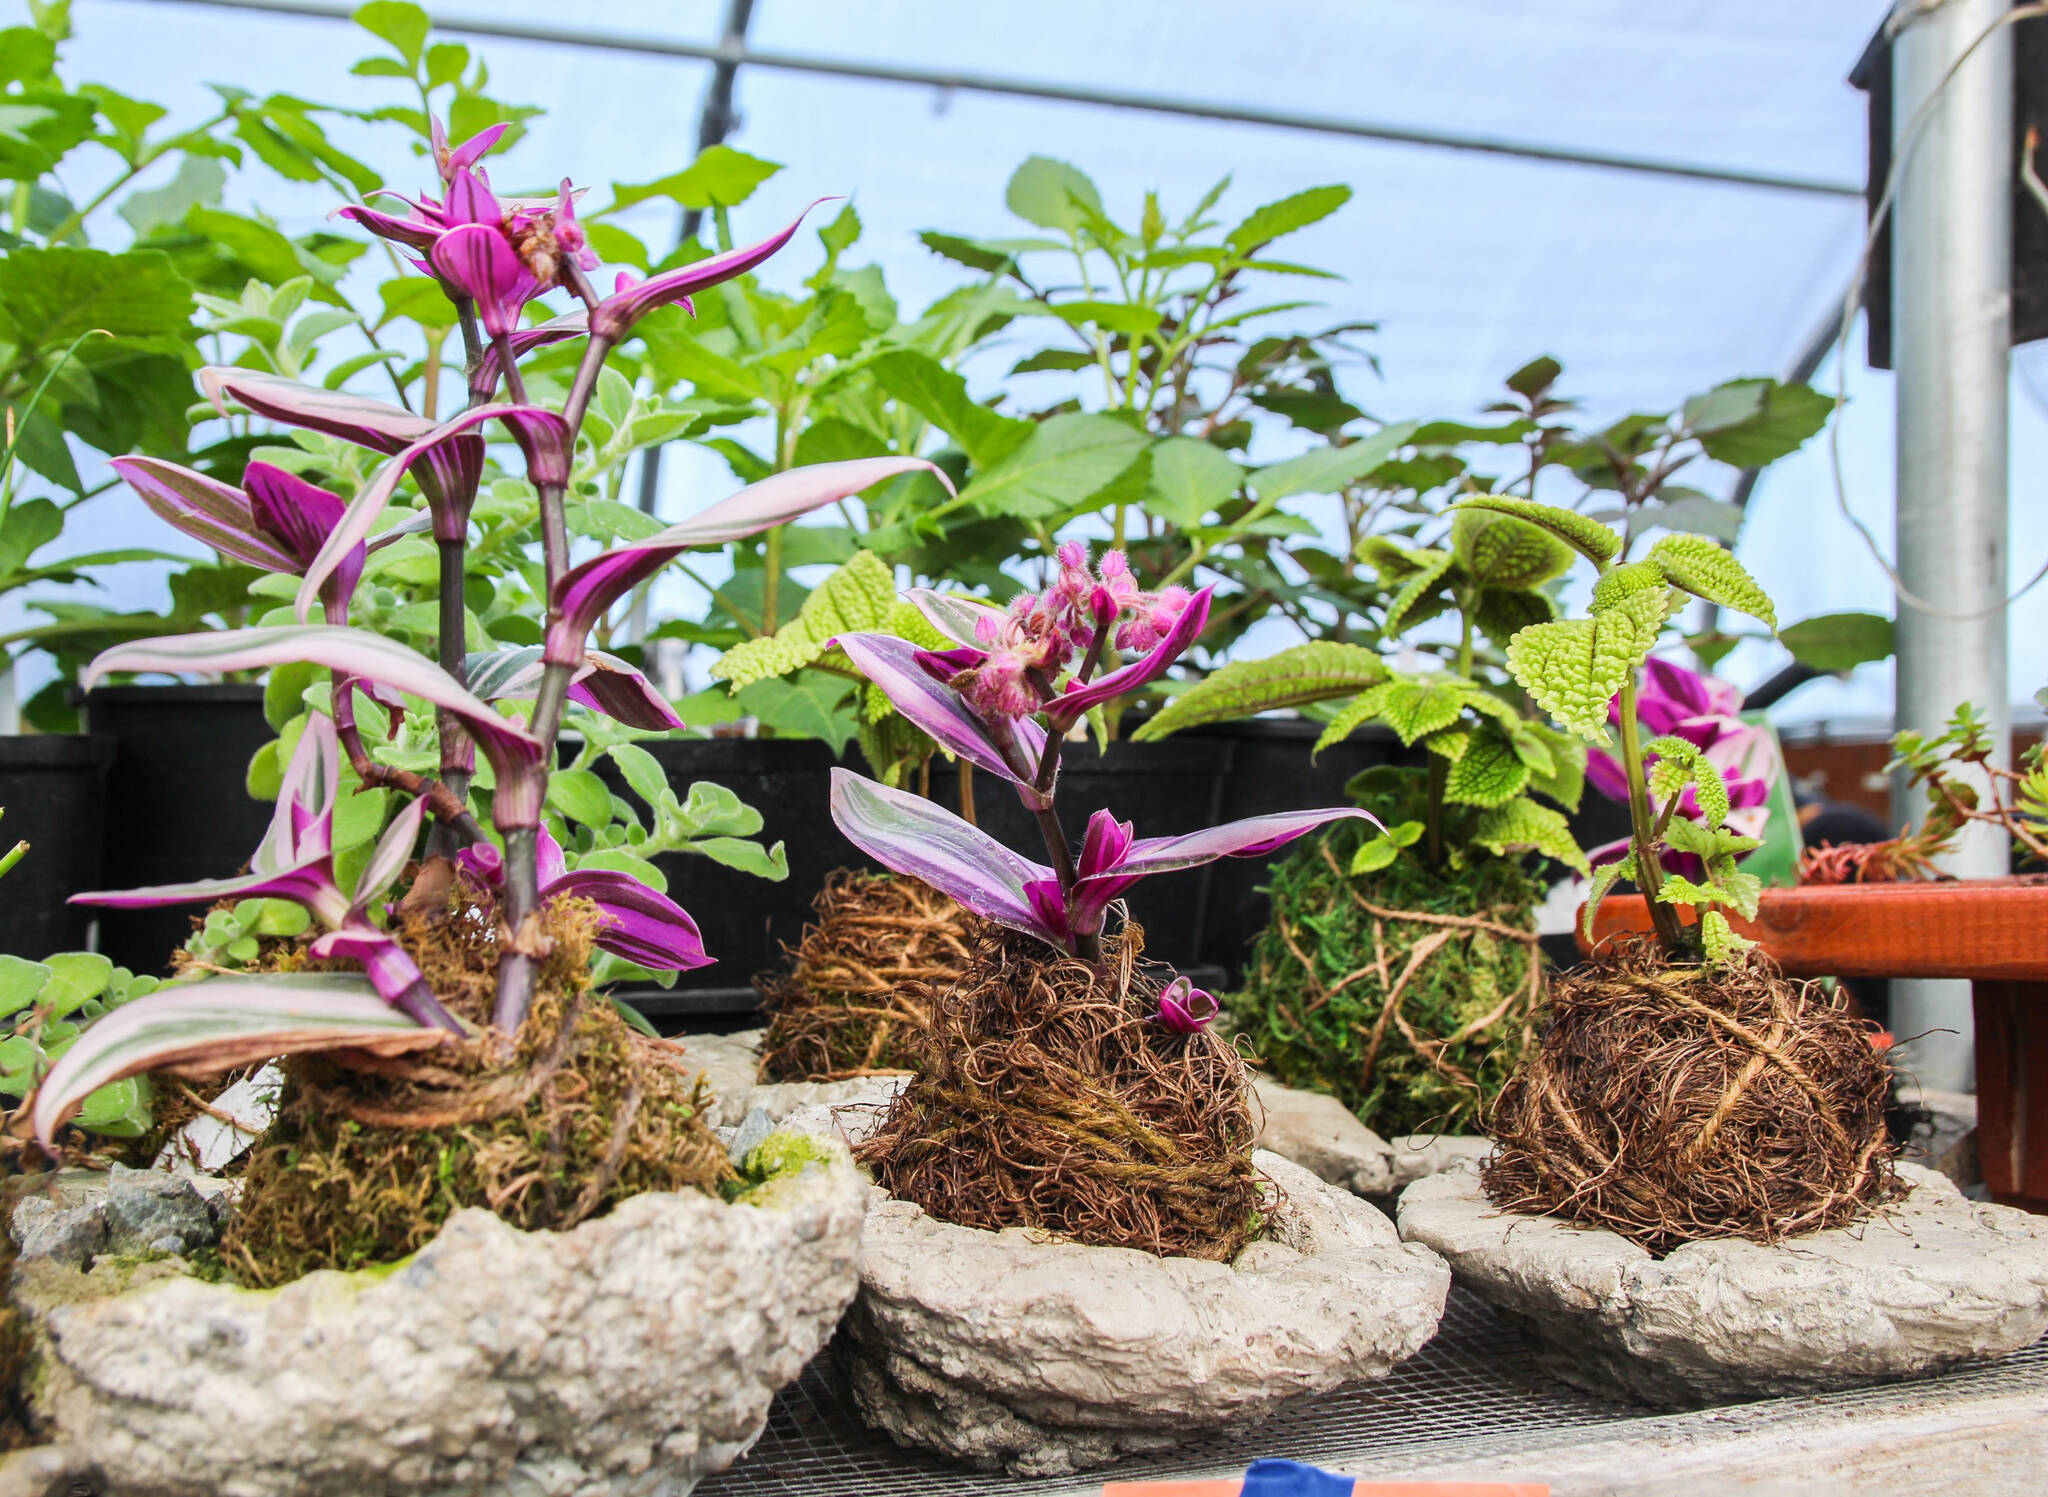 The Coupeville Garden Club will sell these Kodekamas, which are plants growing from balls of soil and moss. (Photo by Luisa Loi)